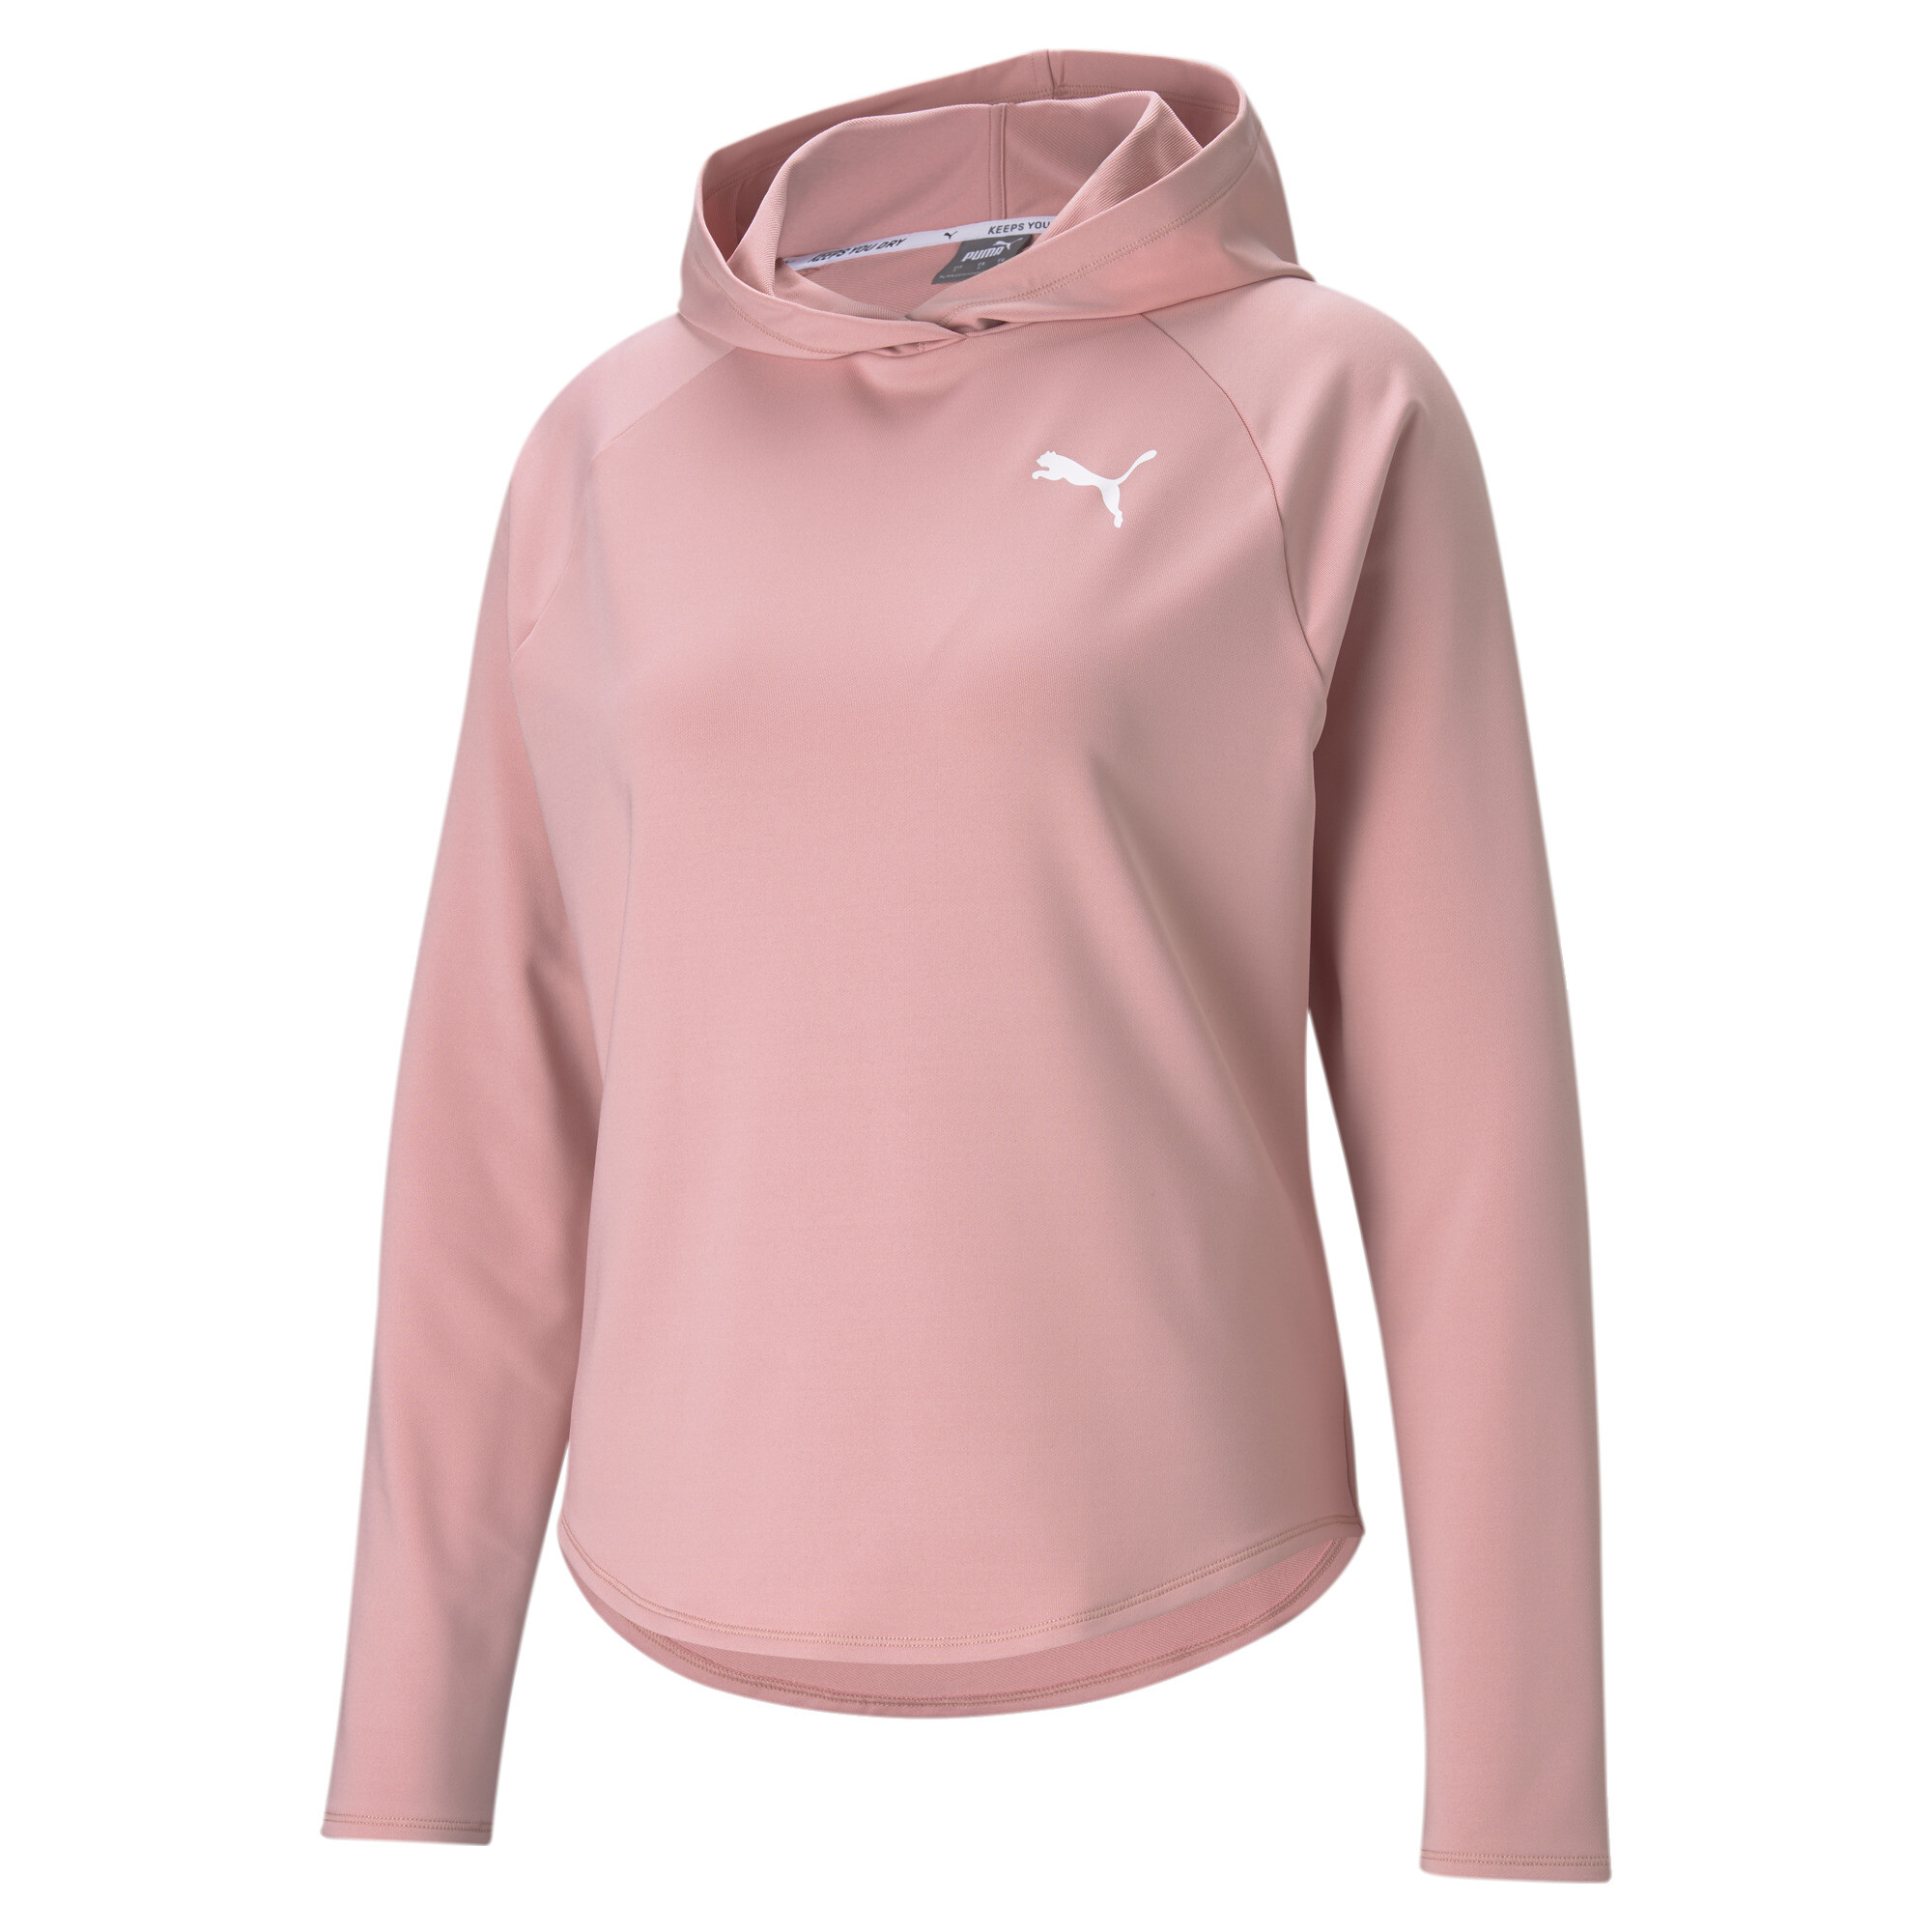 Women's Puma Active's Hoodie, Pink, Size L, Clothing